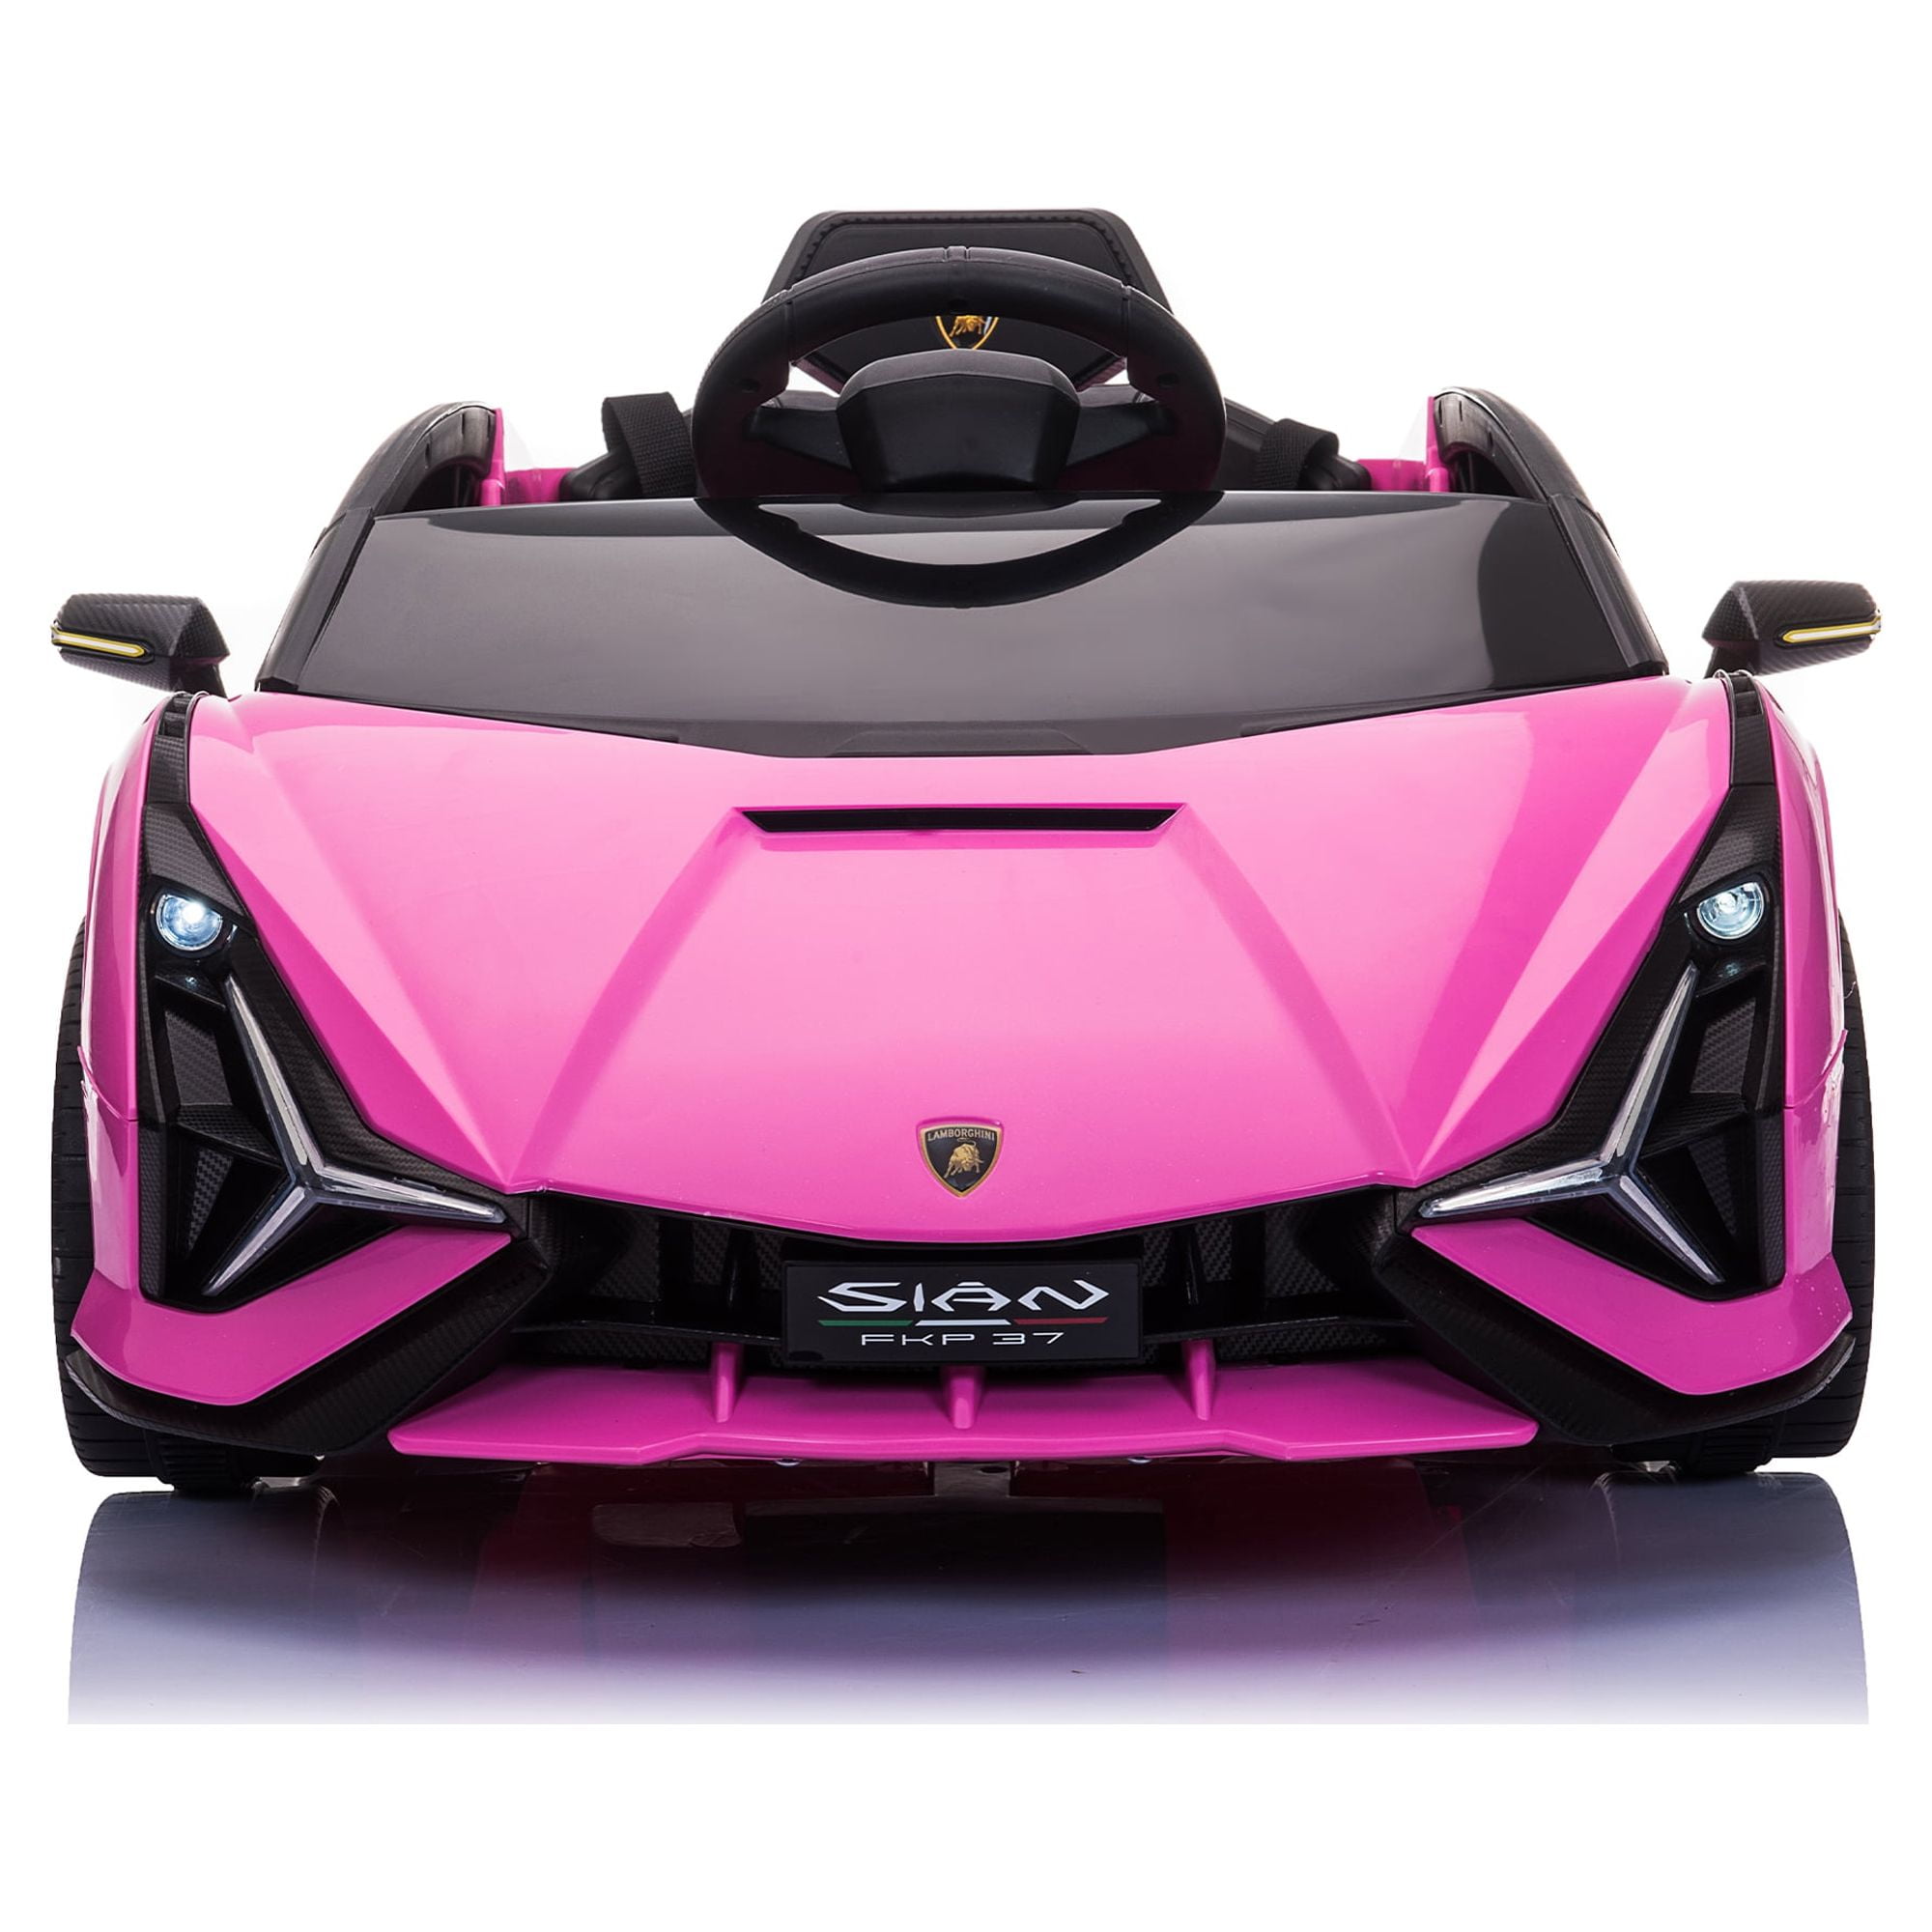 Lamborghini Ride On Car for Kids 3-5 Years, 12v Remote Control Electric ...